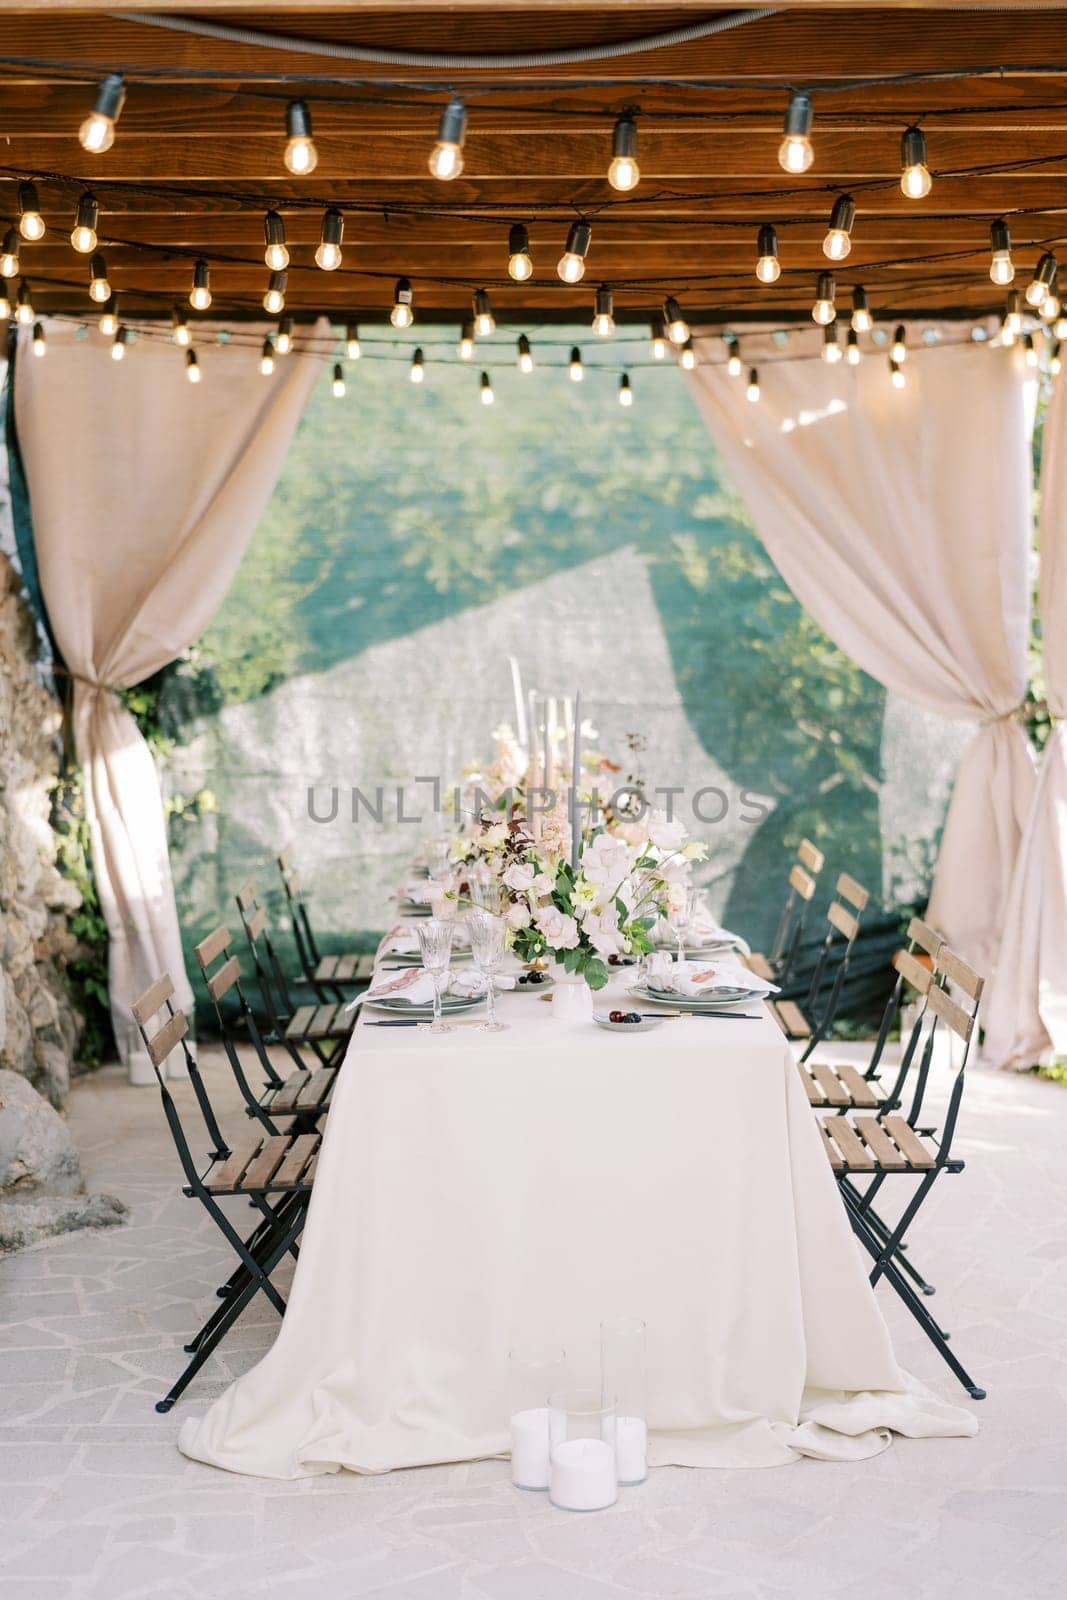 Laid table with bouquets of flowers stands on the terrace of an old house under a wooden canopy with curtains. High quality photo